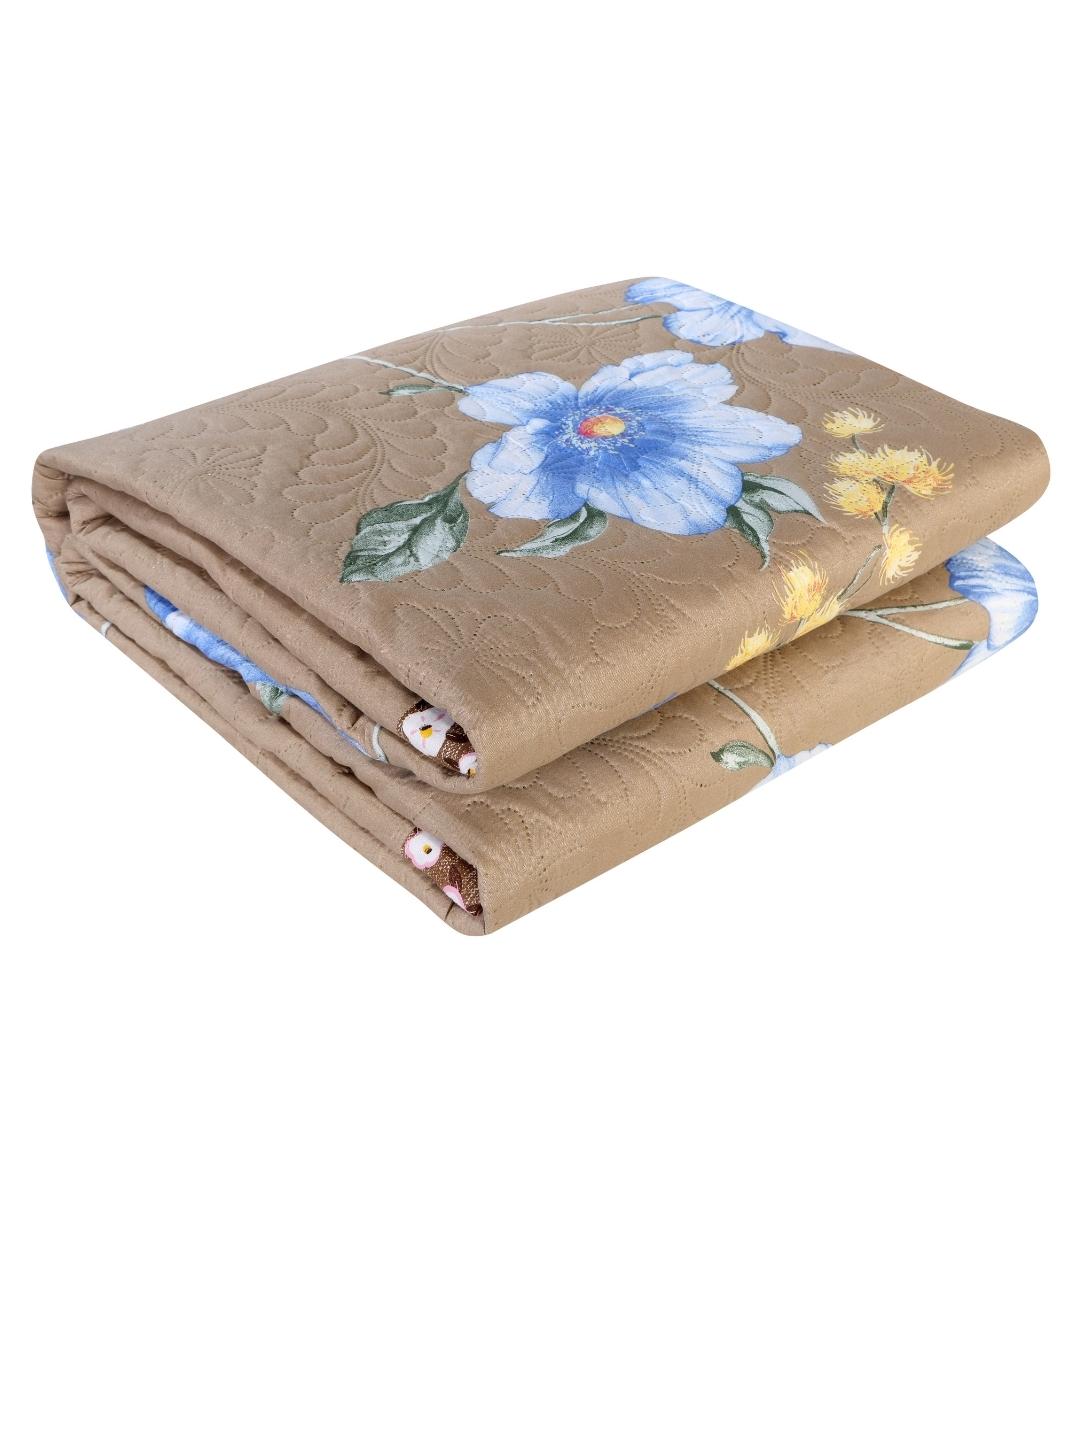 Floral Print Double Bed Light Weight Comforter-Camel Brown